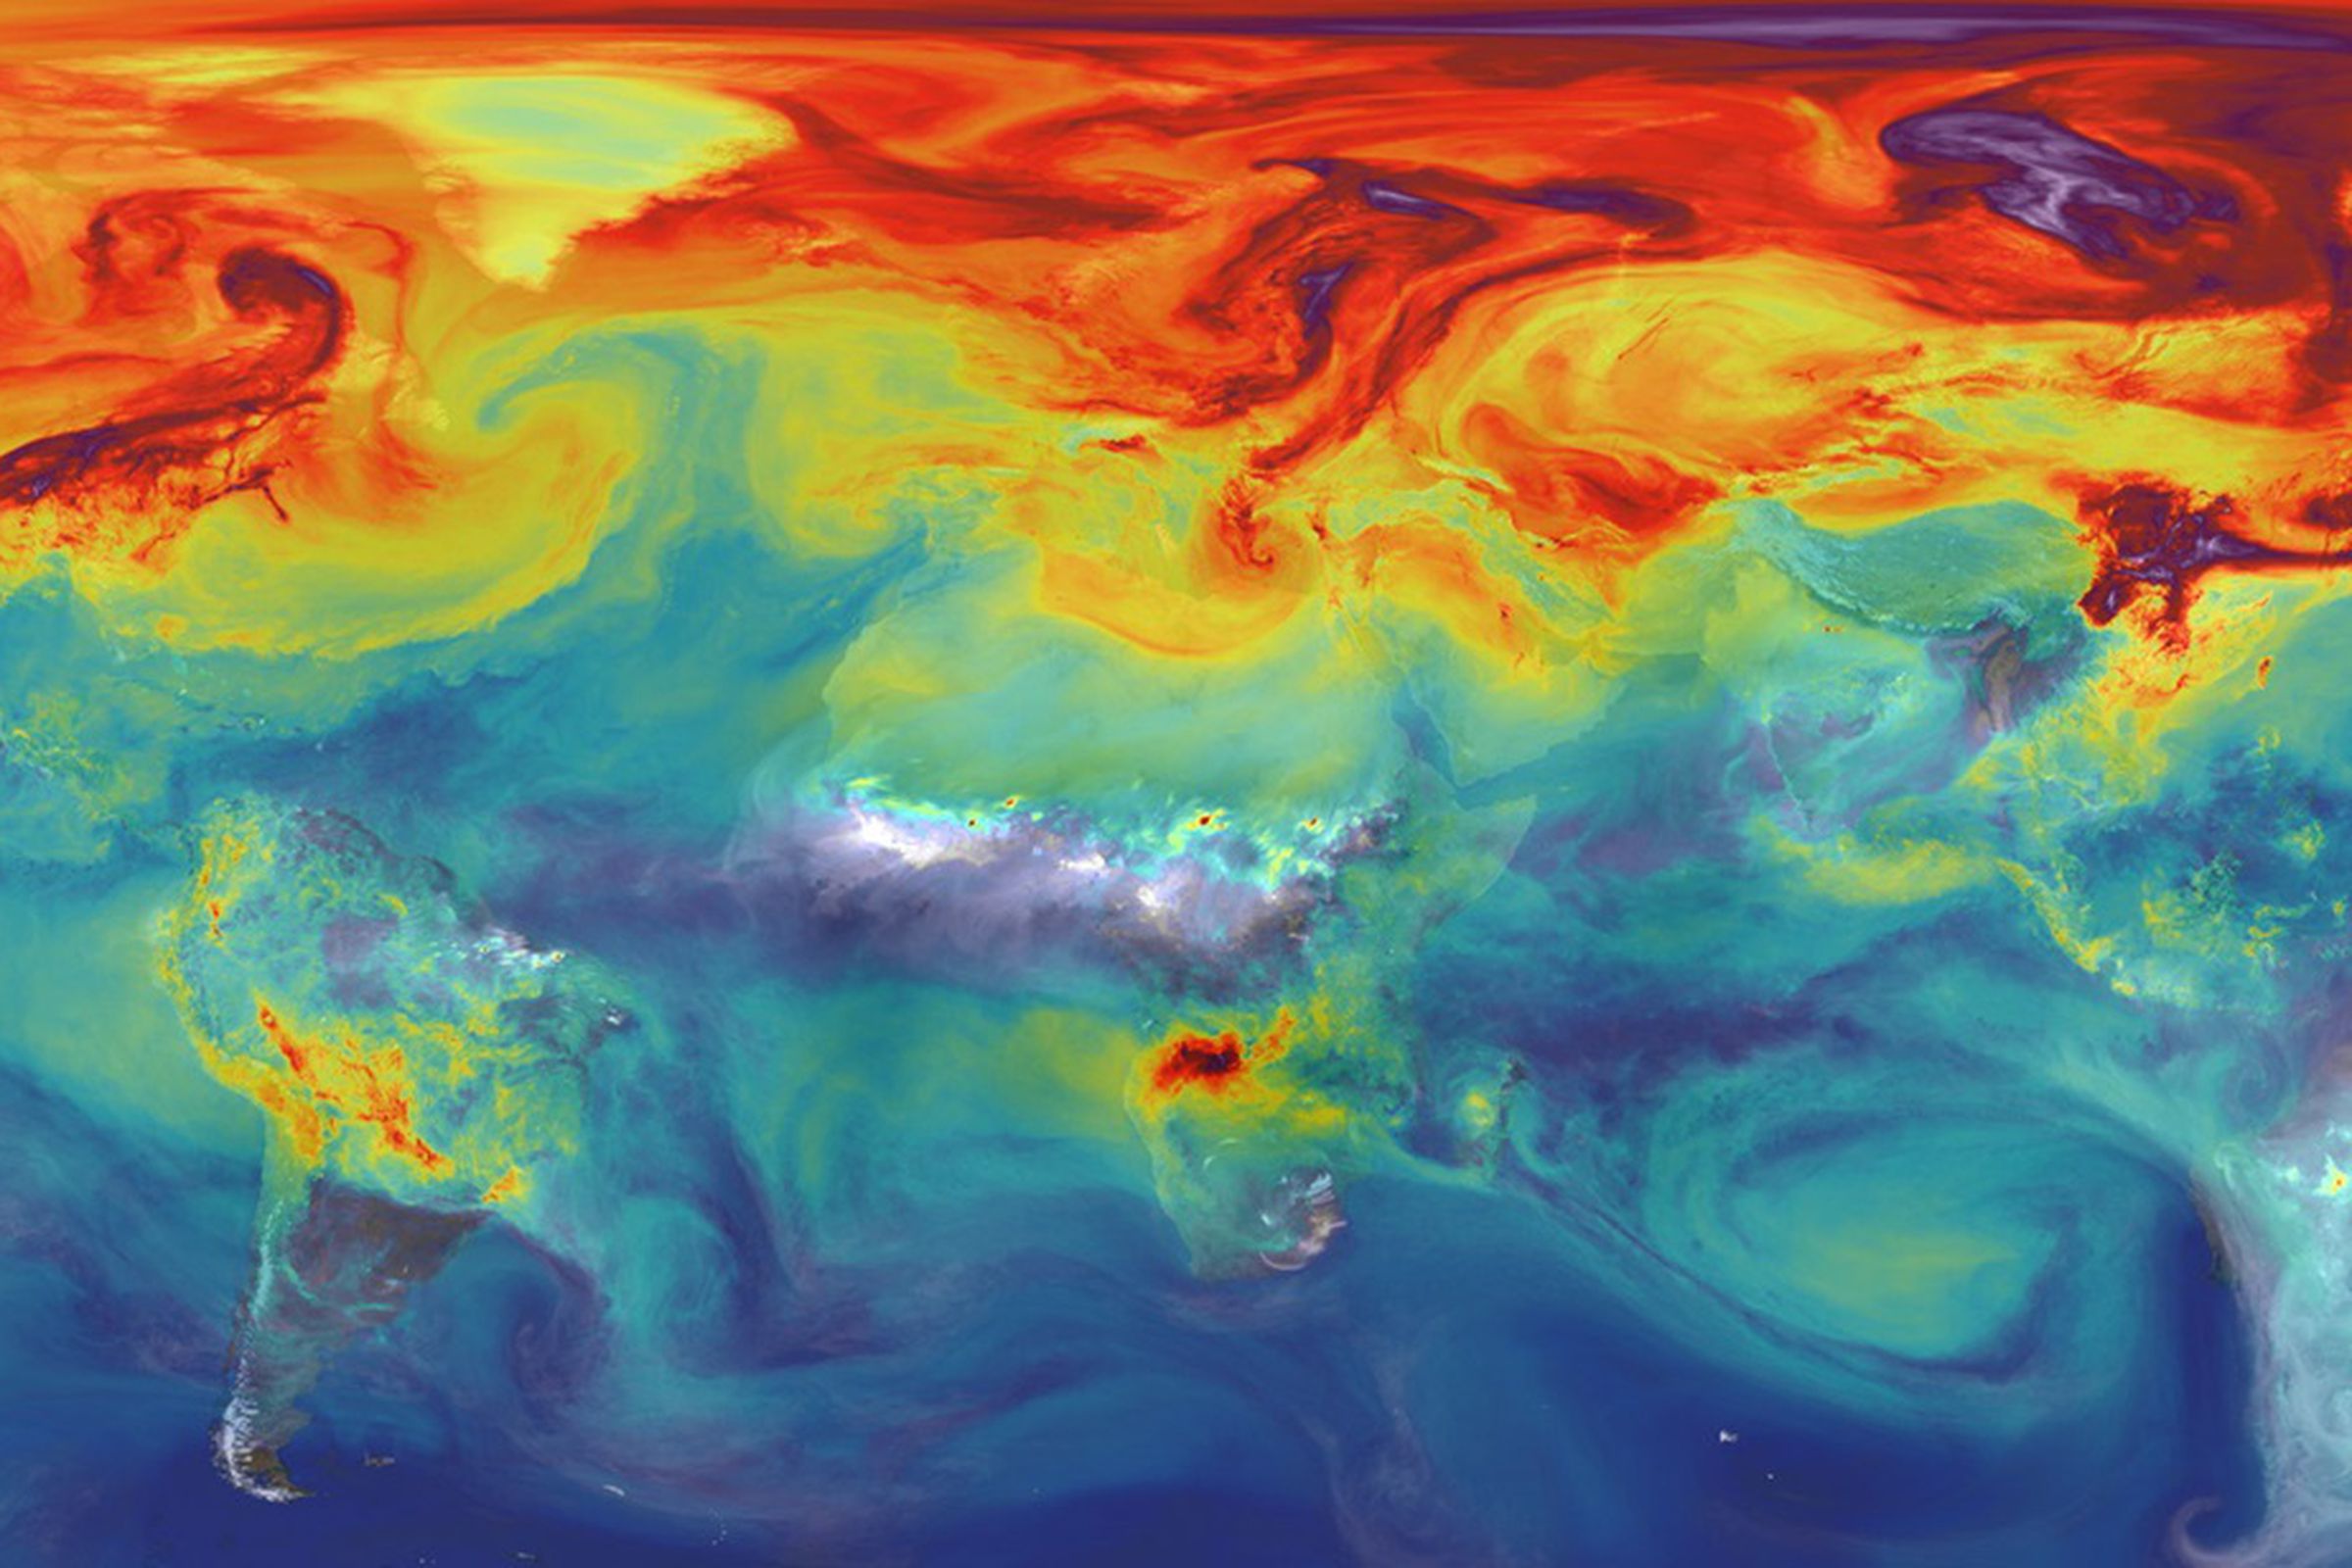 NASA is advancing new tools like the supercomputer model that created this simulation of carbon dioxide in the atmosphere to better understand what will happen to Earth’s climate if the land and ocean can no longer absorb nearly half of all climate-warming CO2 emissions.